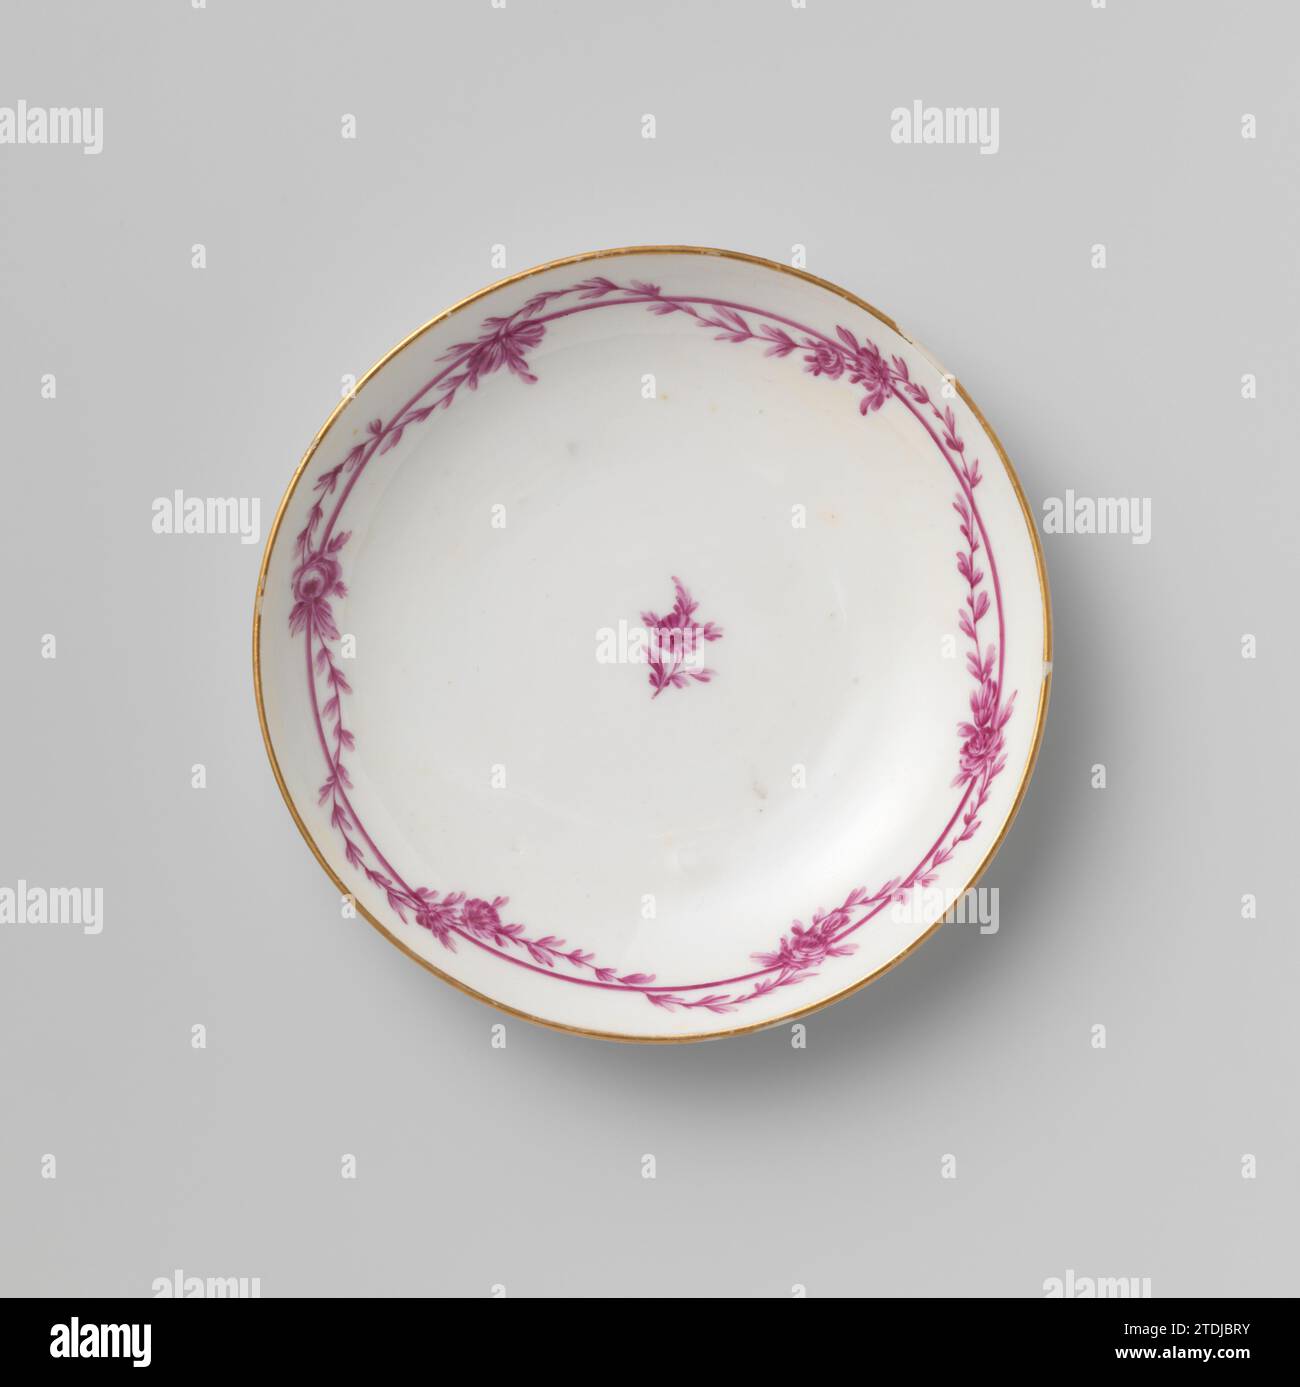 Dish, Manufactuur Oud-Loosdrecht, c. 1780 Porcelain saucer, decorated in beet red with a floured flower and leaf garland piped around a continuous piping. The edges are gilded. Decorated with sprinkles in beet red. Marked M.O.L. With a star in underlaze blue. Loosdrecht porcelain Porcelain saucer, decorated in beet red with a floured flower and leaf garland piped around a continuous piping. The edges are gilded. Decorated with sprinkles in beet red. Marked M.O.L. With a star in underlaze blue. Loosdrecht porcelain Stock Photo